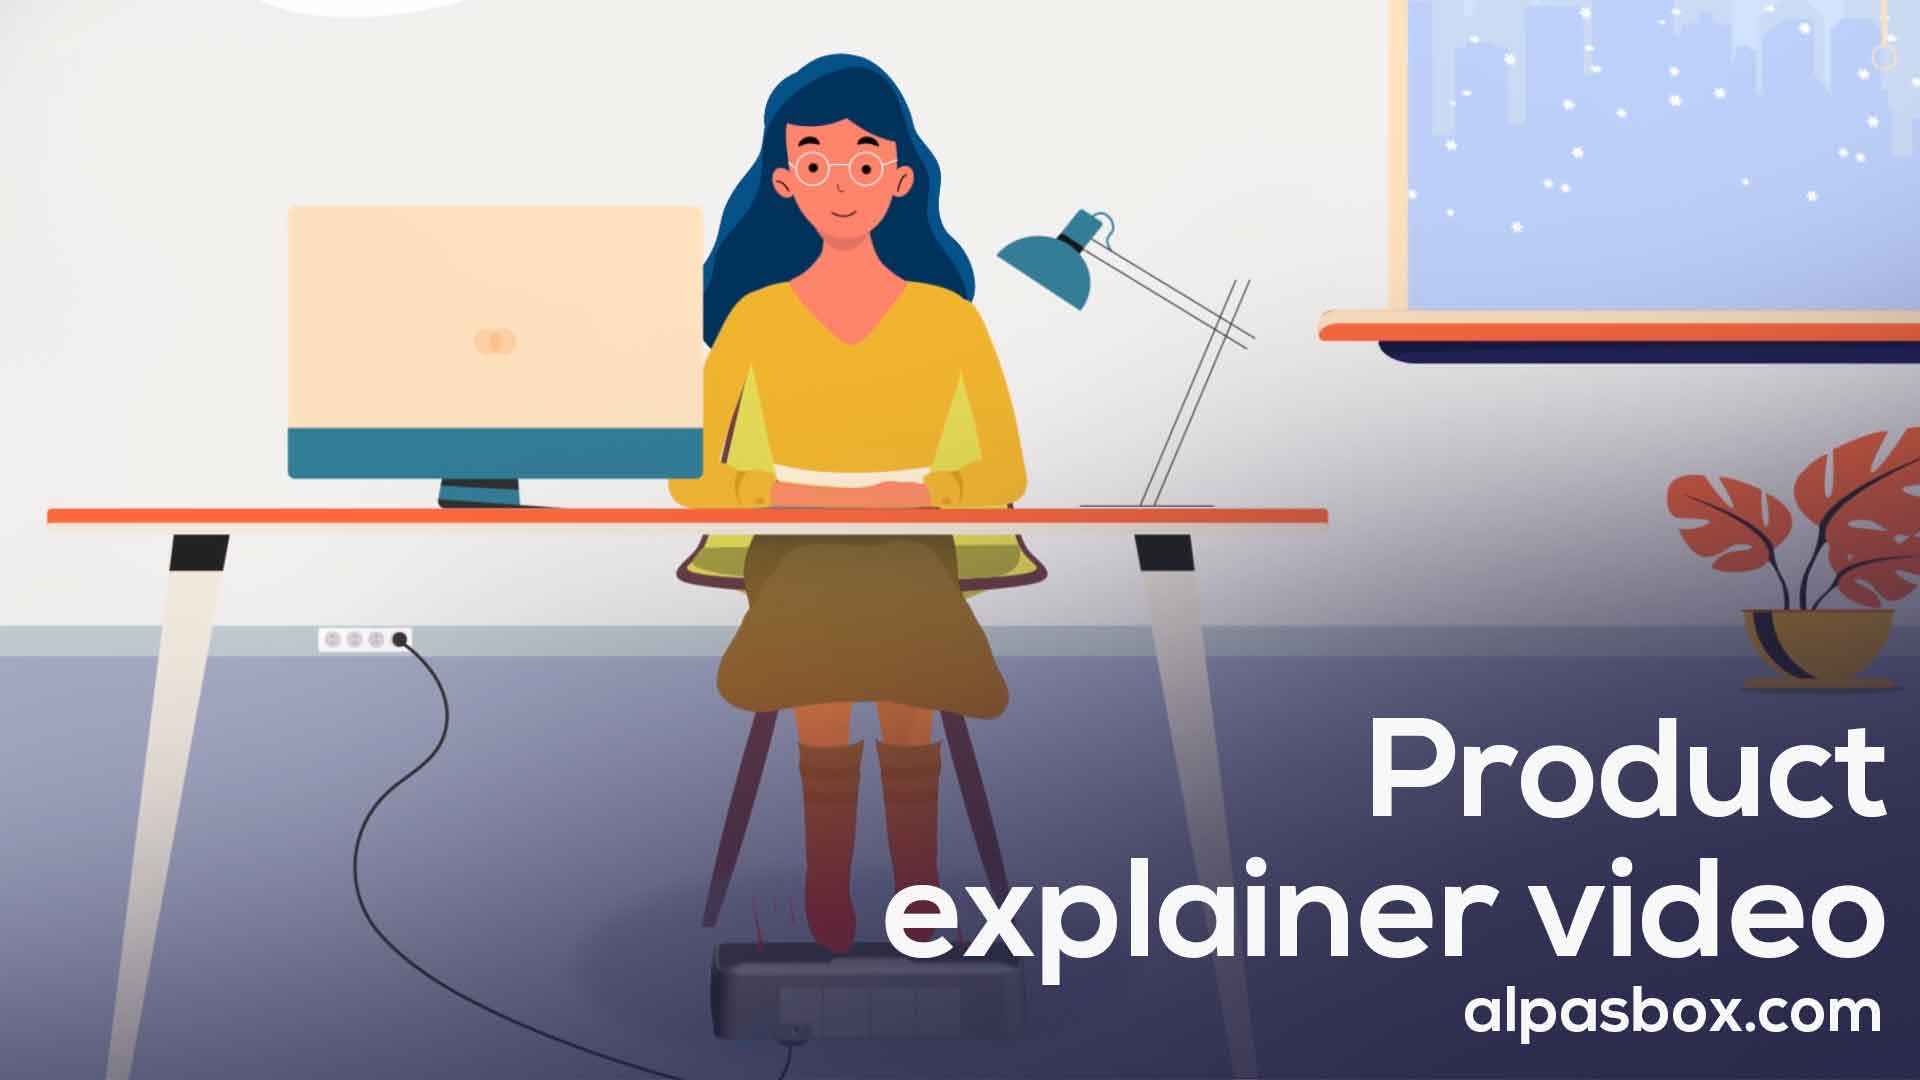 Product explainer video production